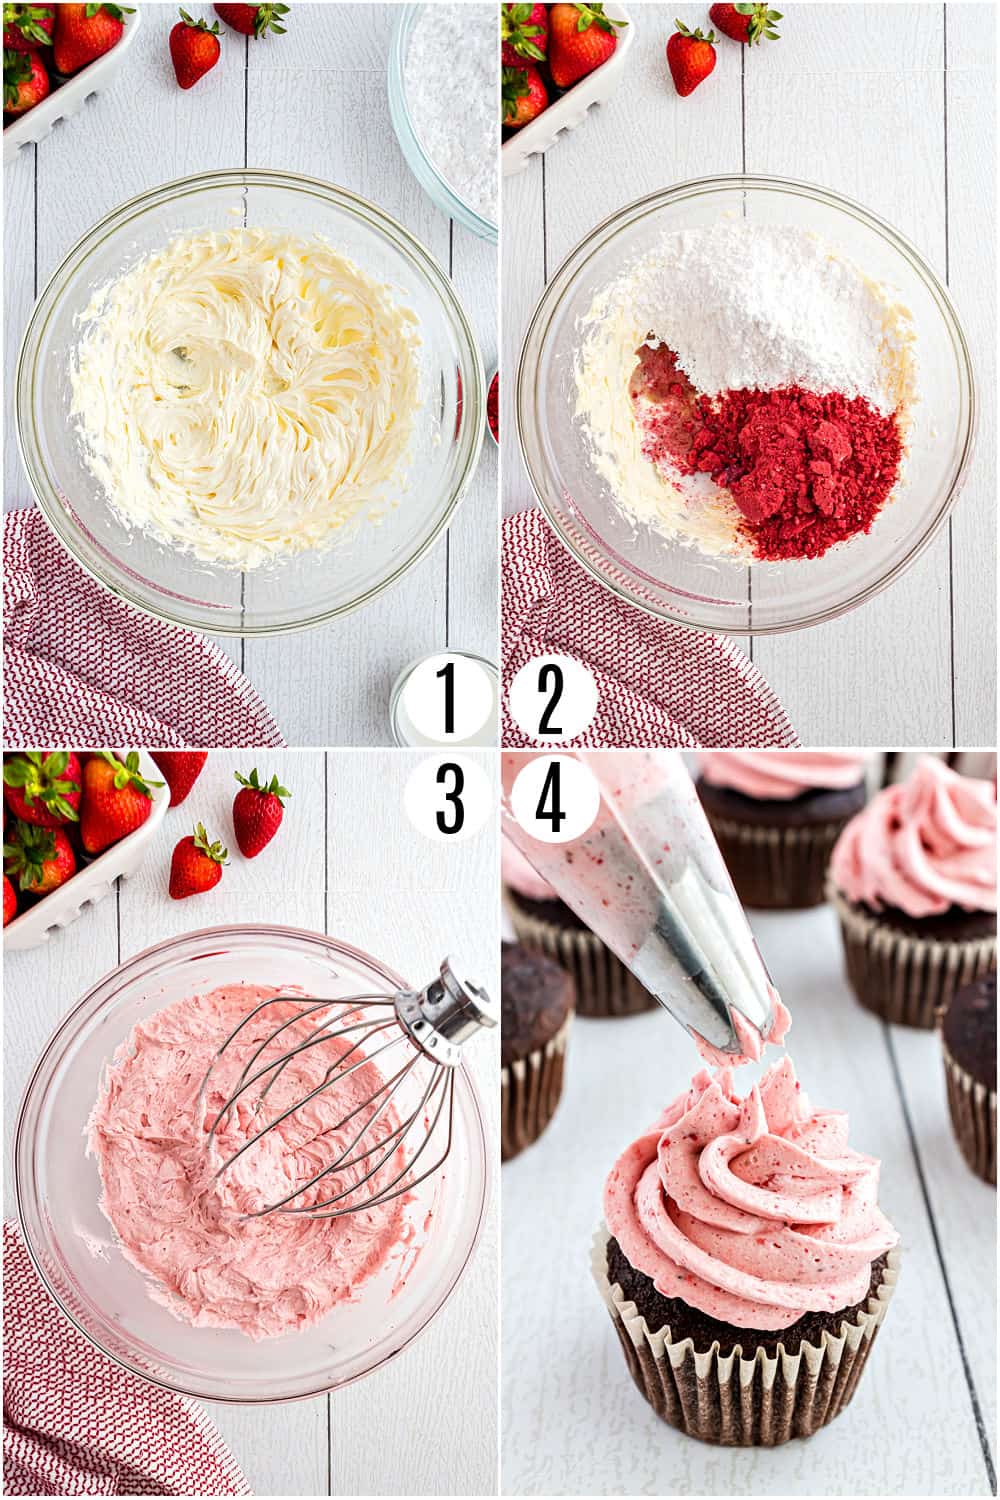 Step by step photos showing how to make strawberry frosting.